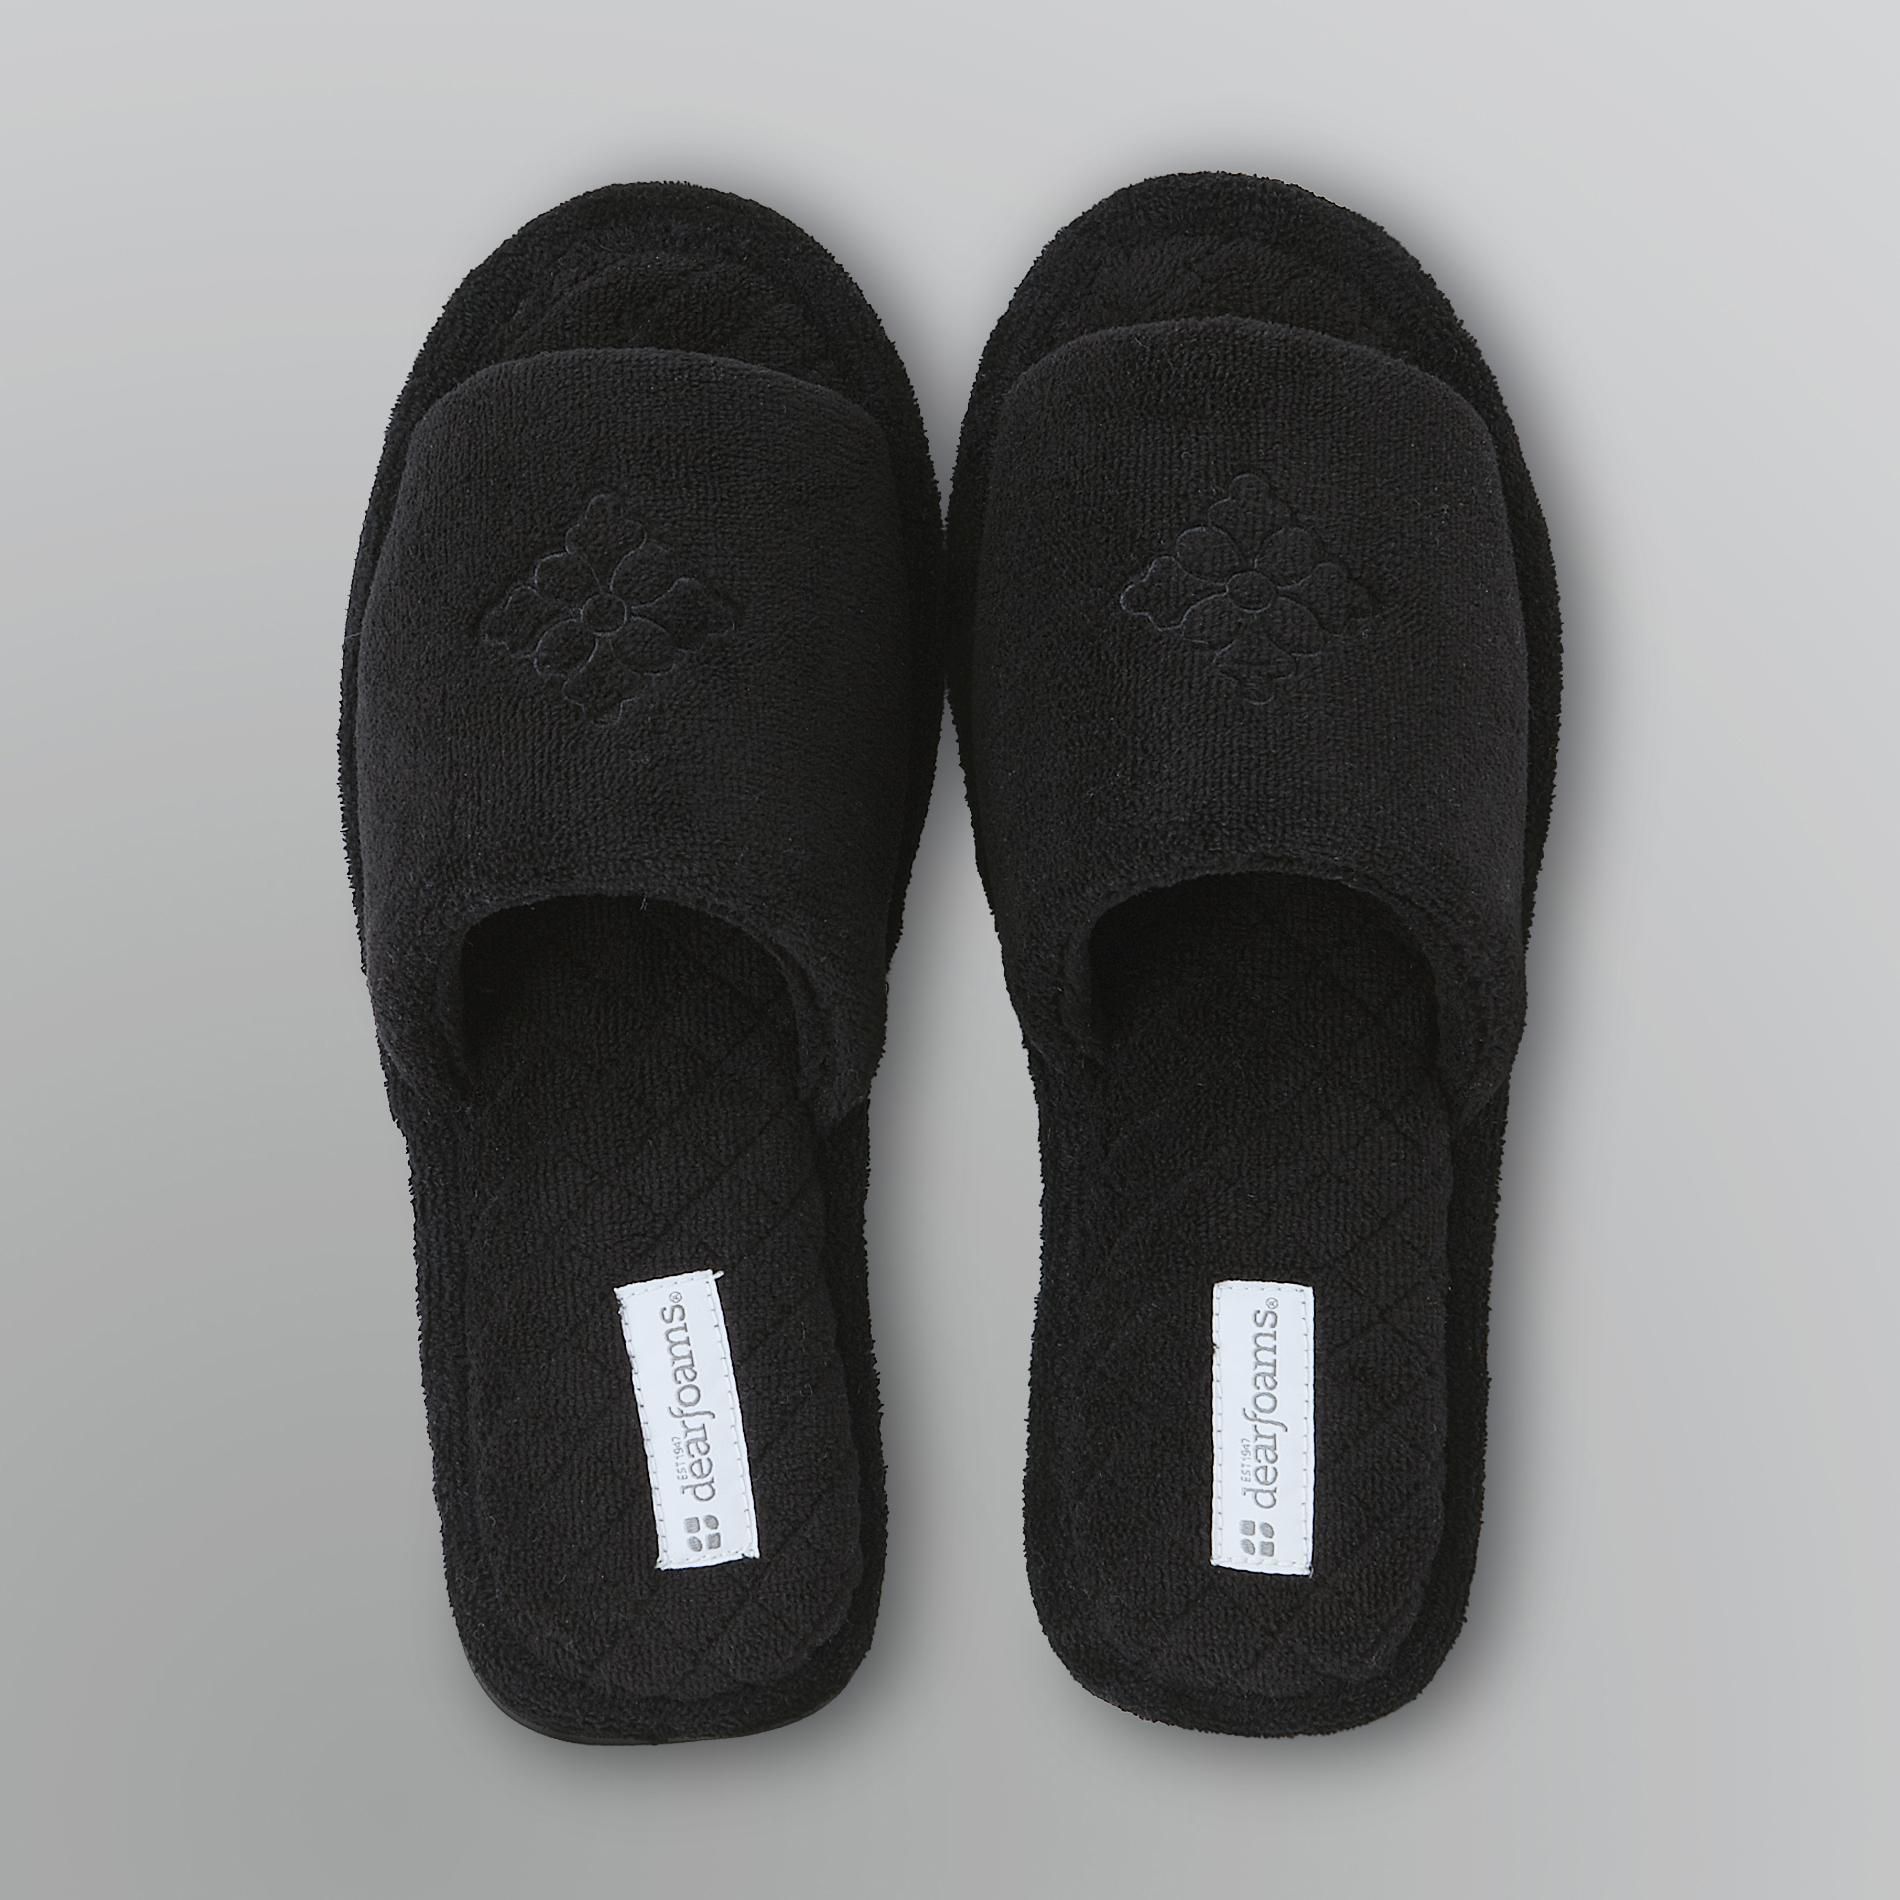 rg barry slippers